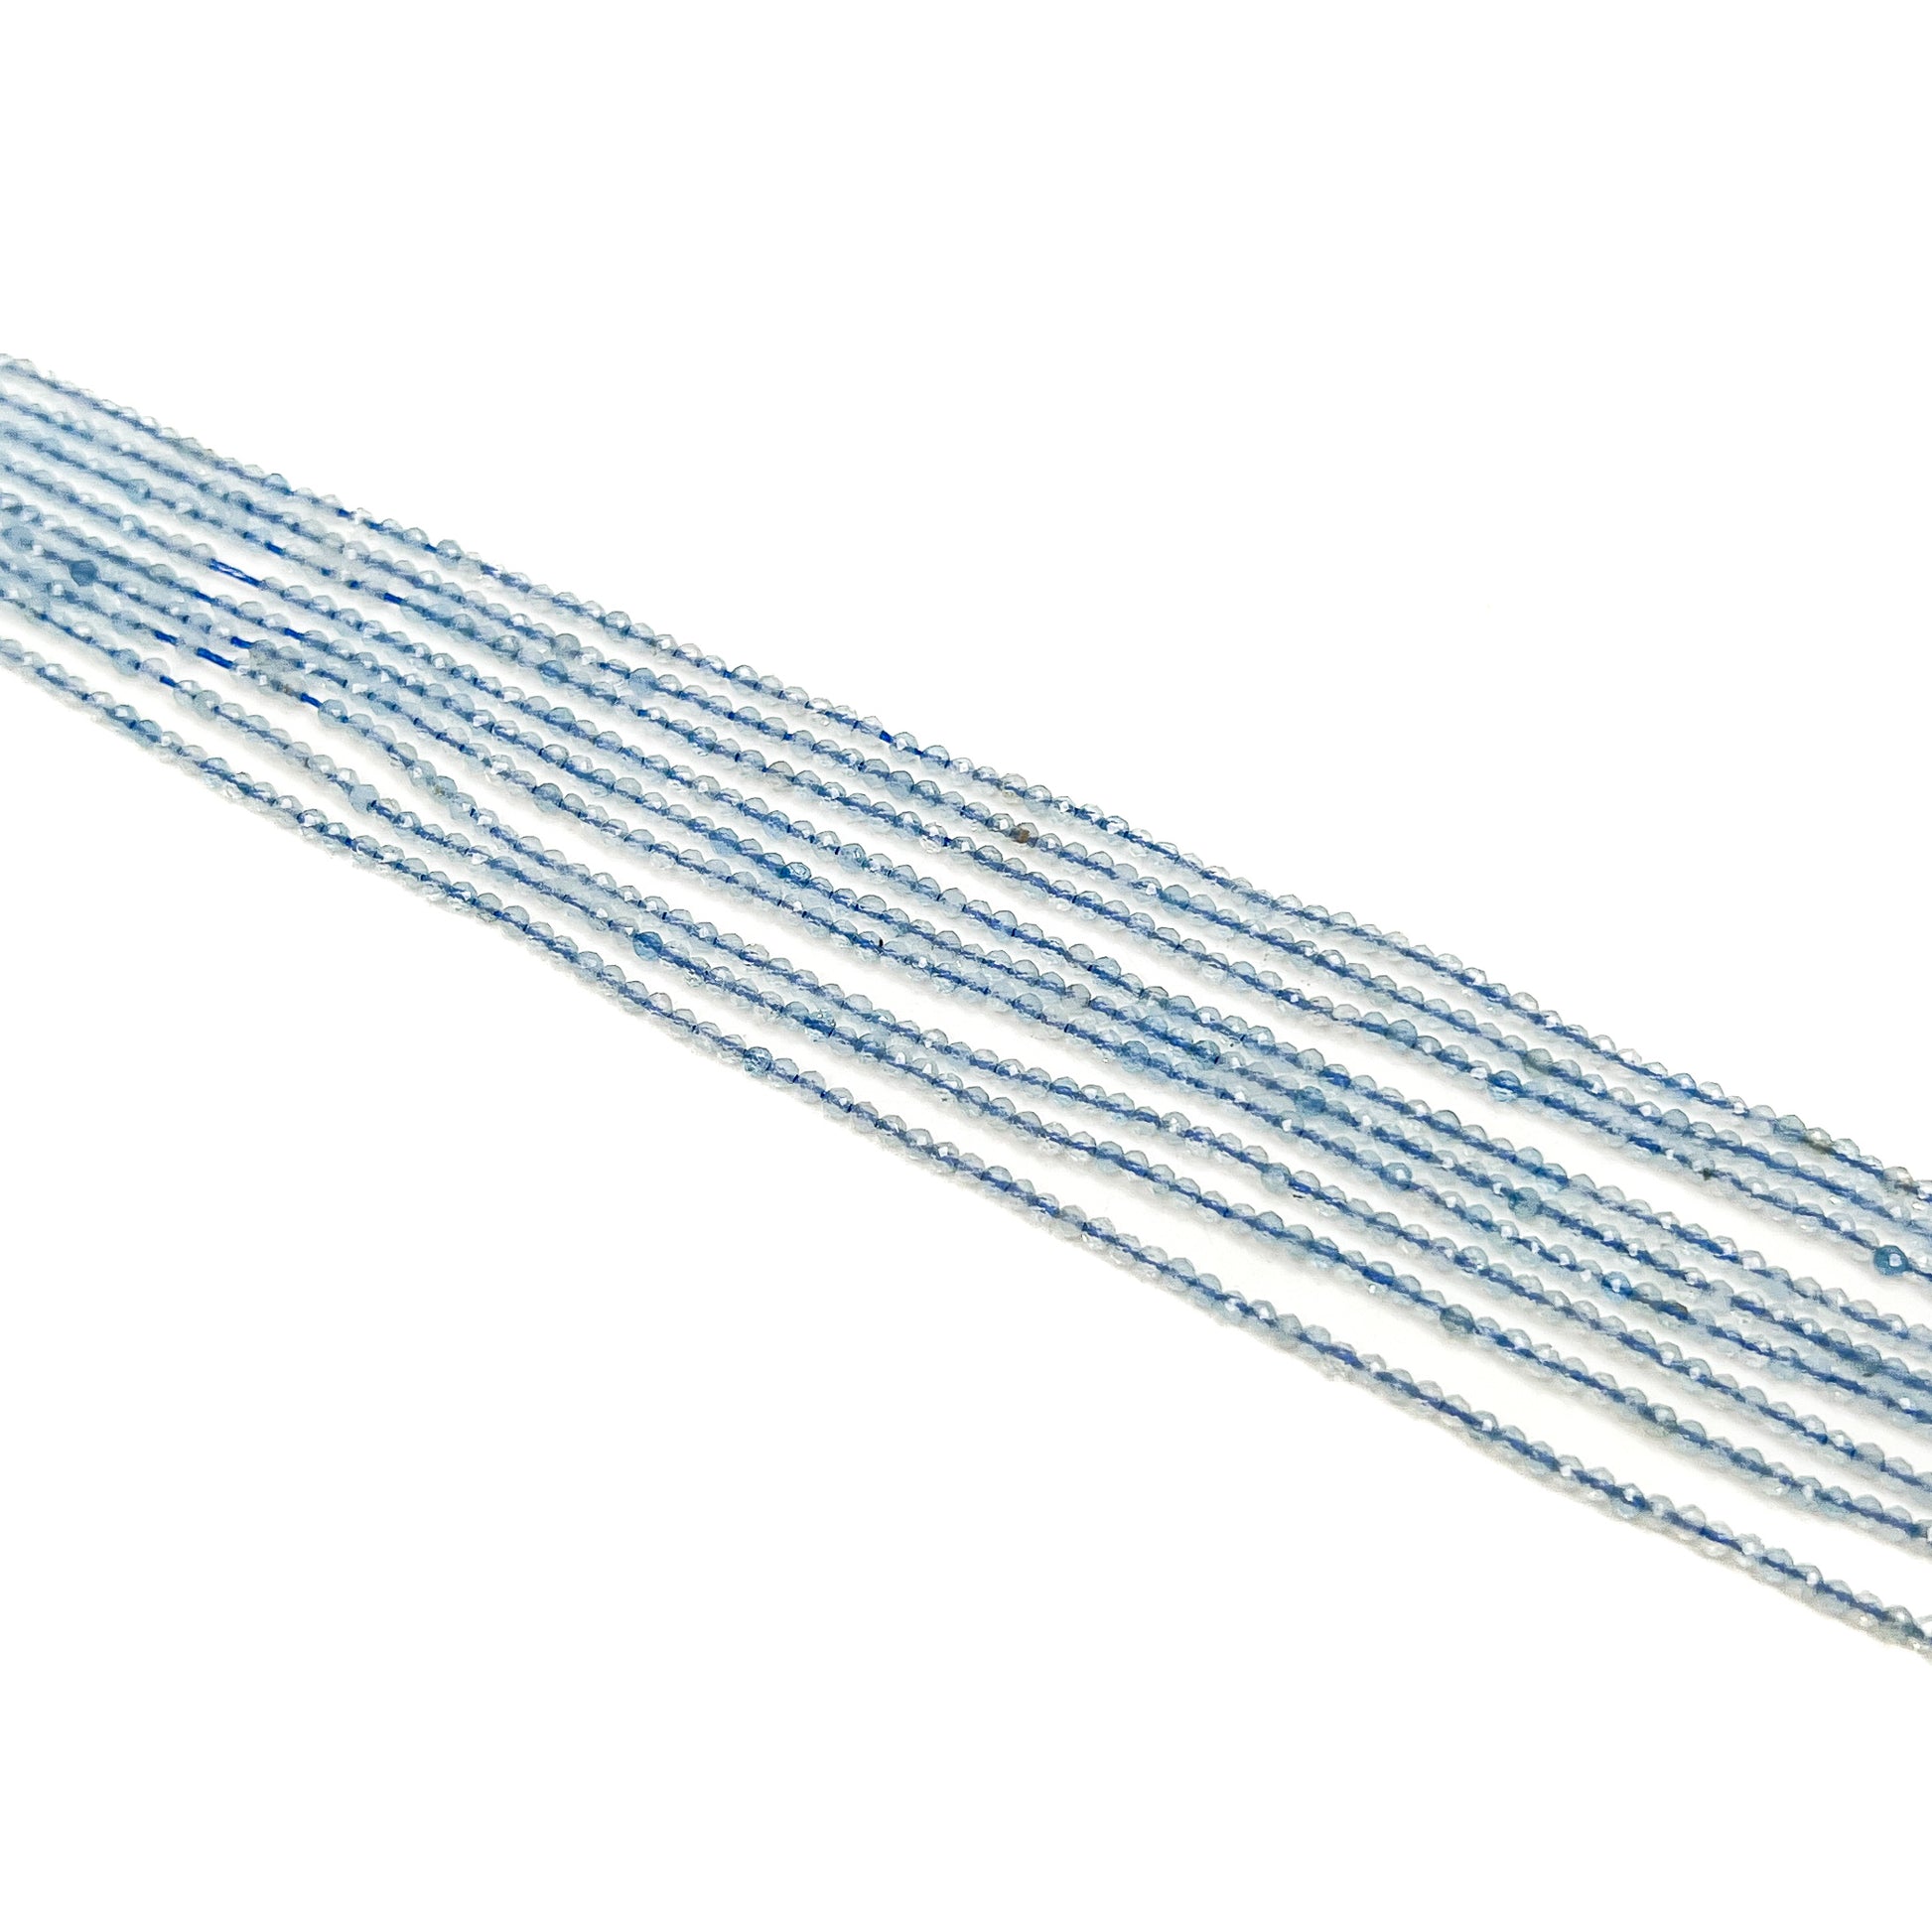 Aquamarine 2mm Faceted Round Bead Strand - (2 Quantities Available)